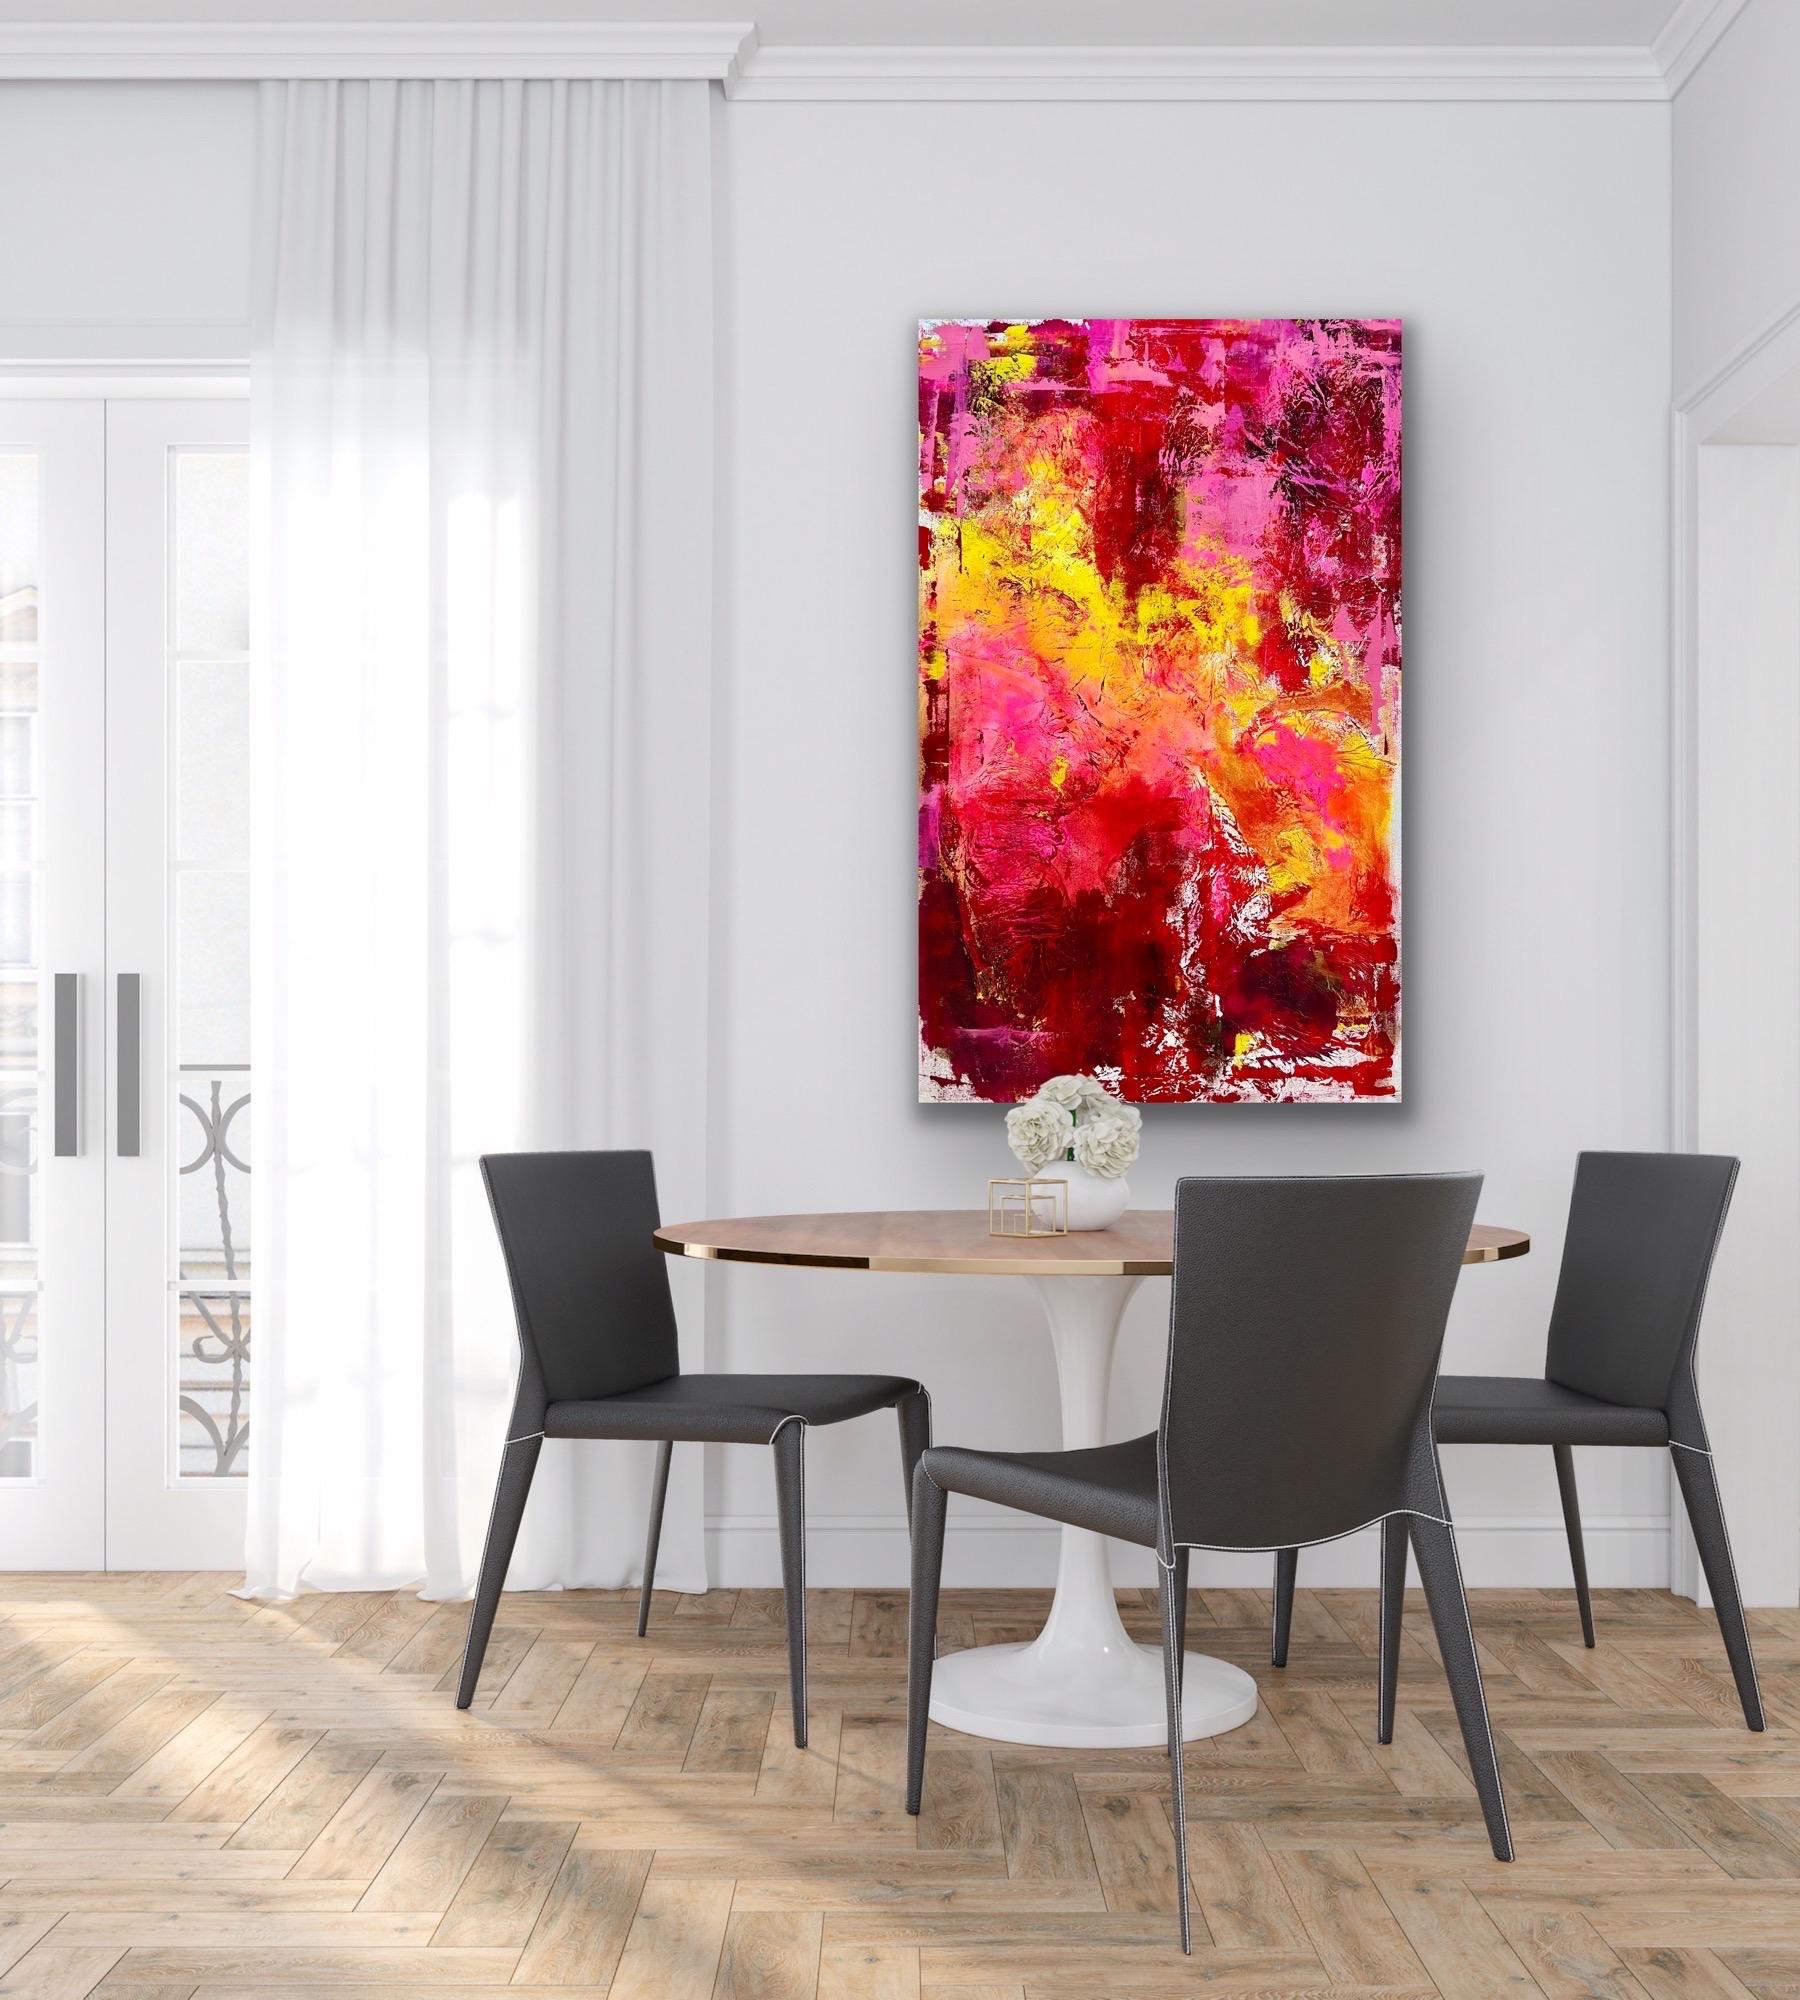 Large original signed abstract mixed media painting in hues of red, pink and yellow.  Titled 